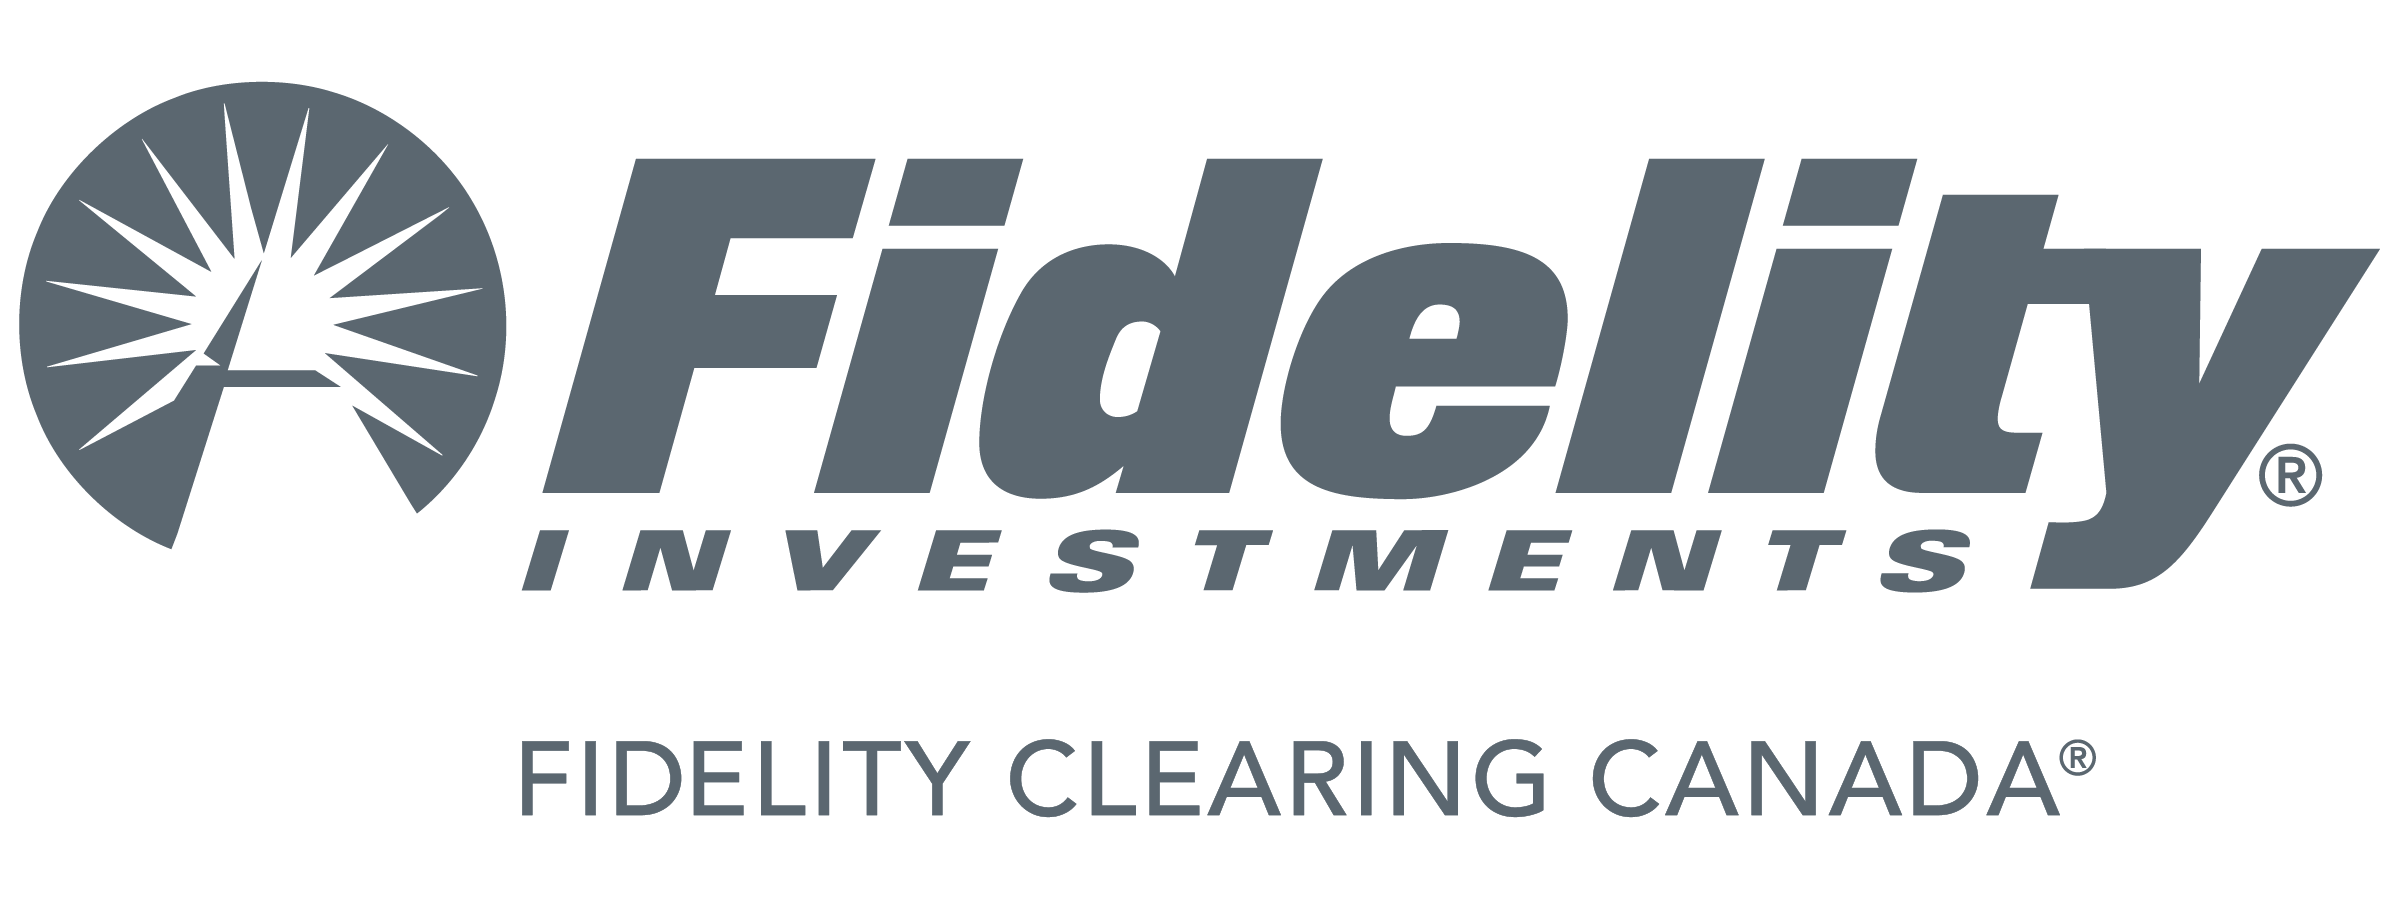 Fidelity Clearning Canada